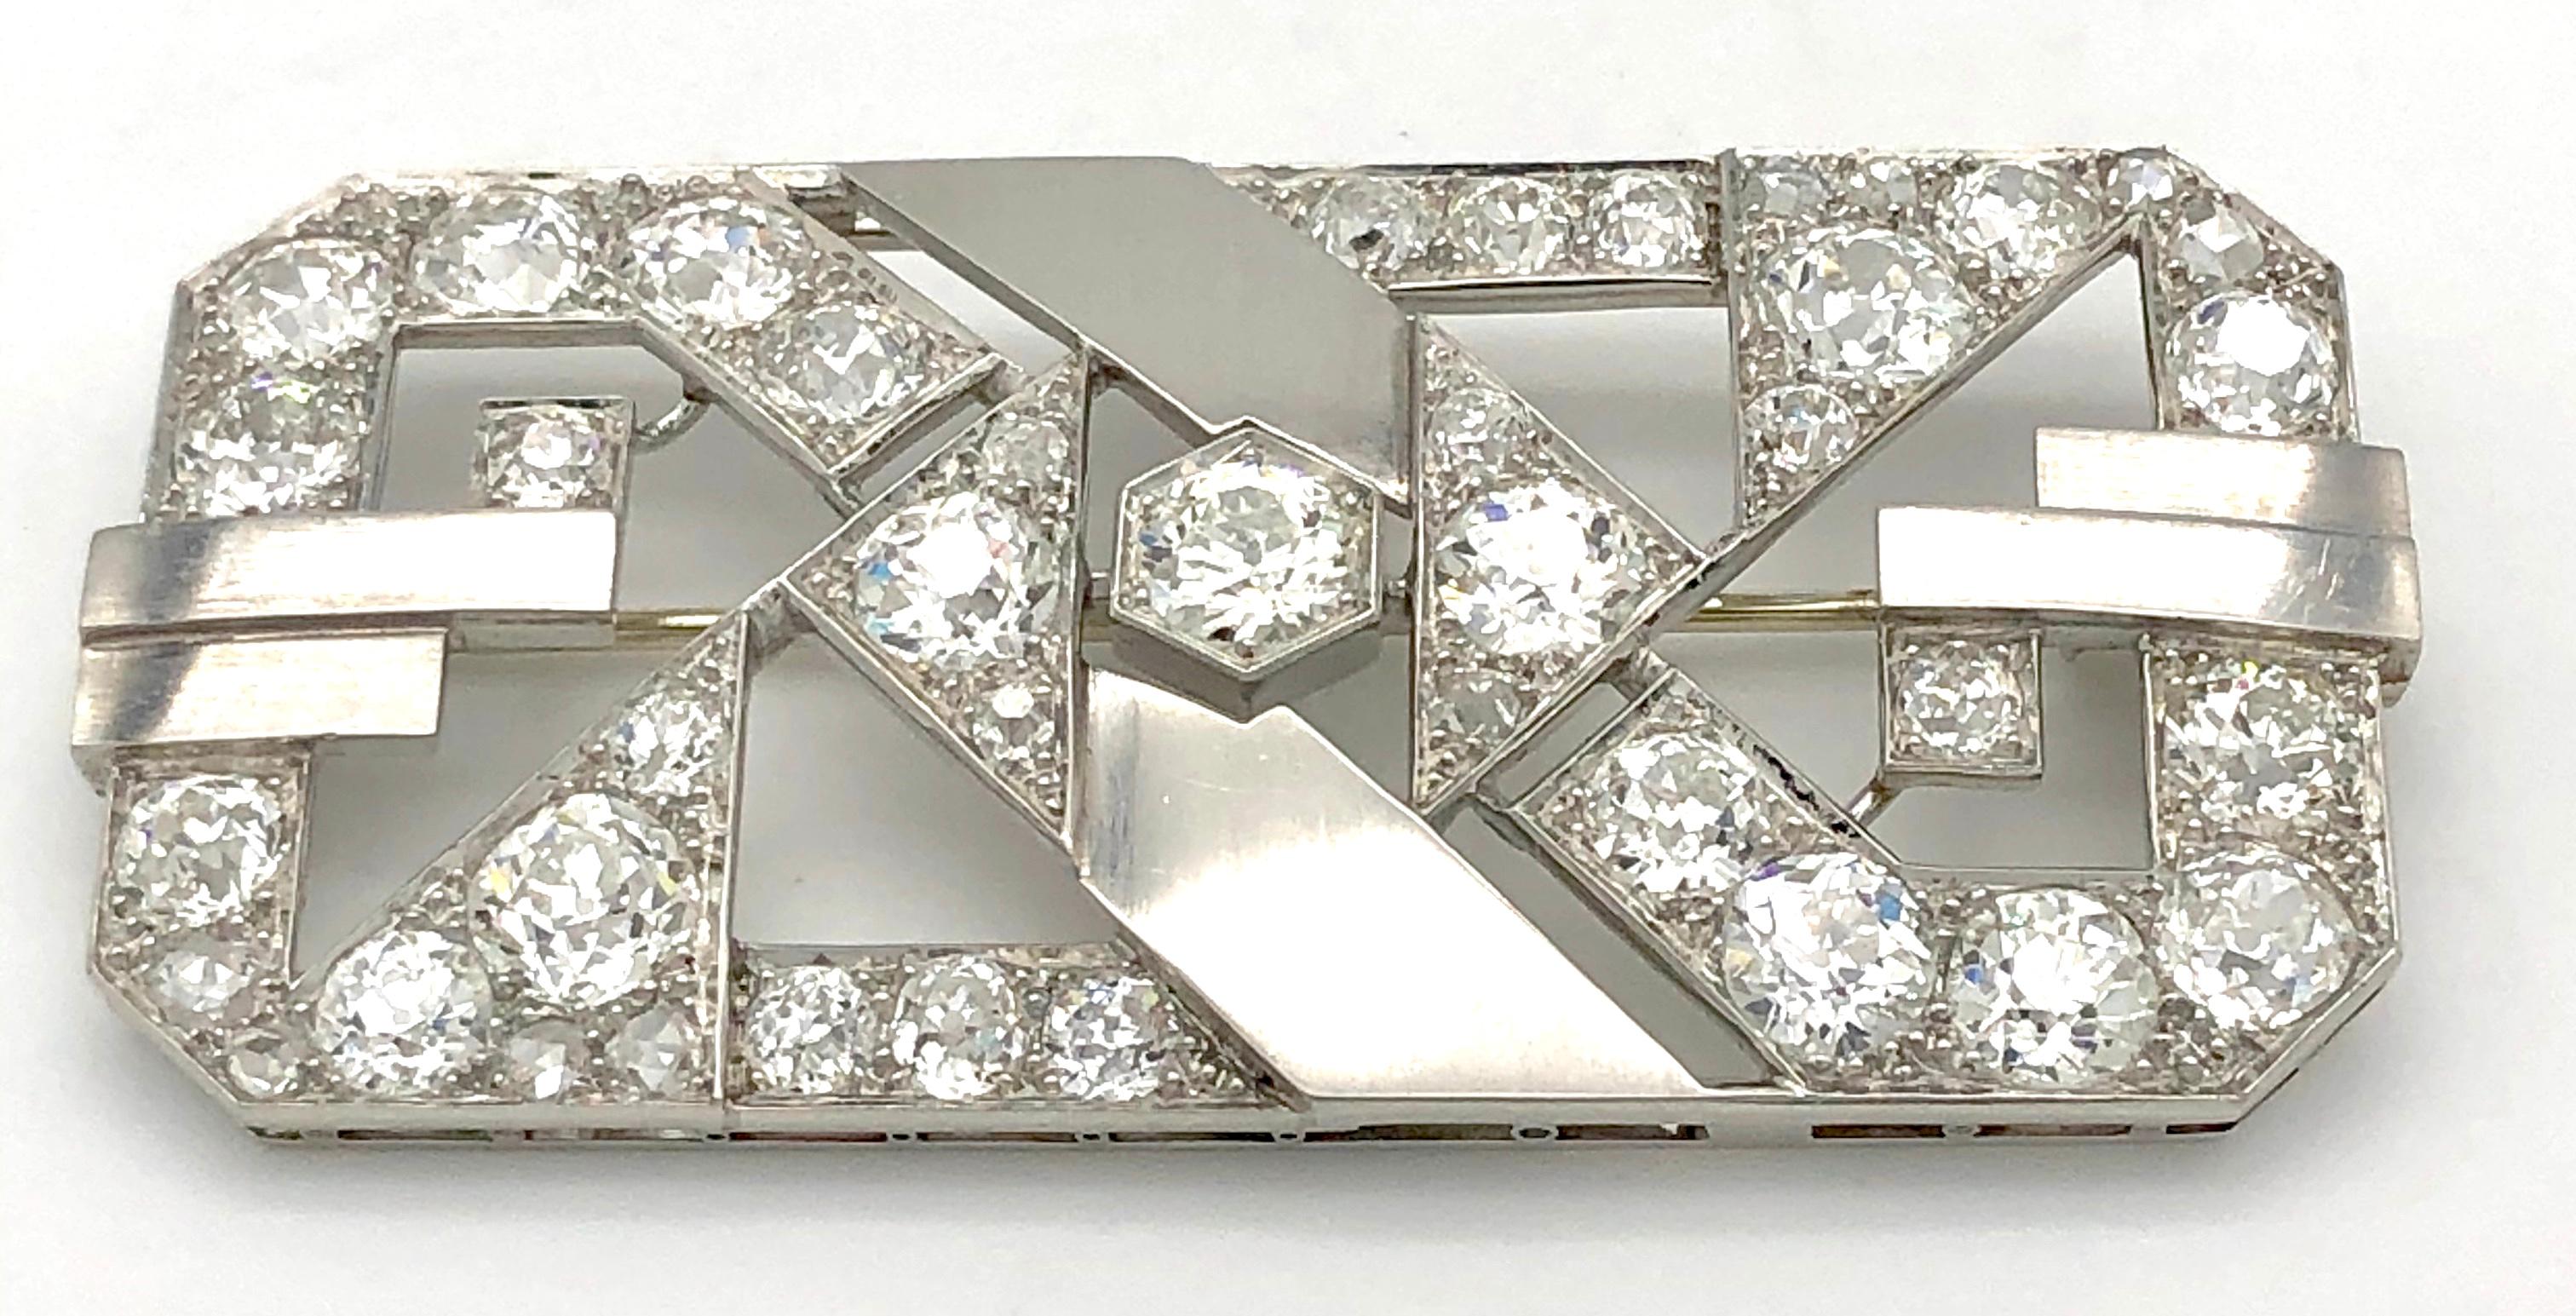 The design of this very elegant, diamond set platinum and white gold Art Deco brooch plays with the contrast  of the serenity of plain polished surfaces and the flamboyance of 41 sparkling diamonds with a total weight of 11 carats ca. 
This piece of